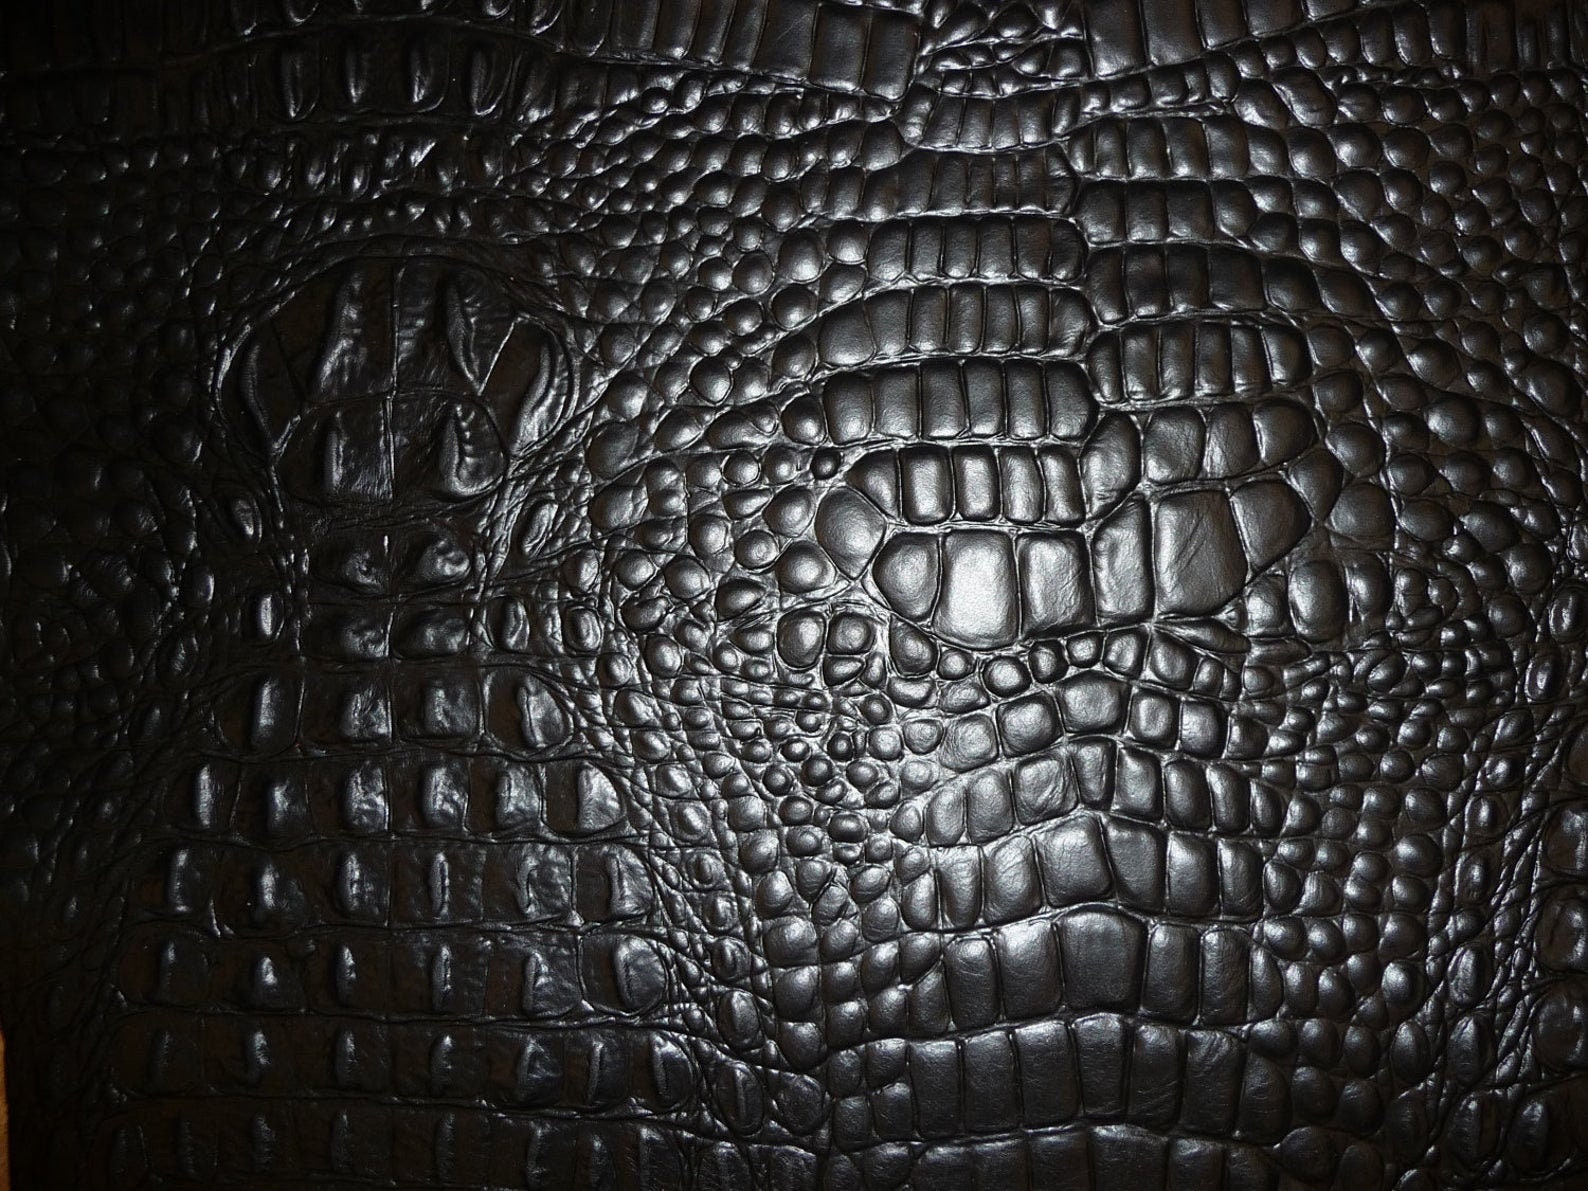 Alligator 12x12 BLACK Croc Embossed Cowhide 2.5-3oz/ 1-1.2 mm  PeggySueAlso E2860-21 hides available